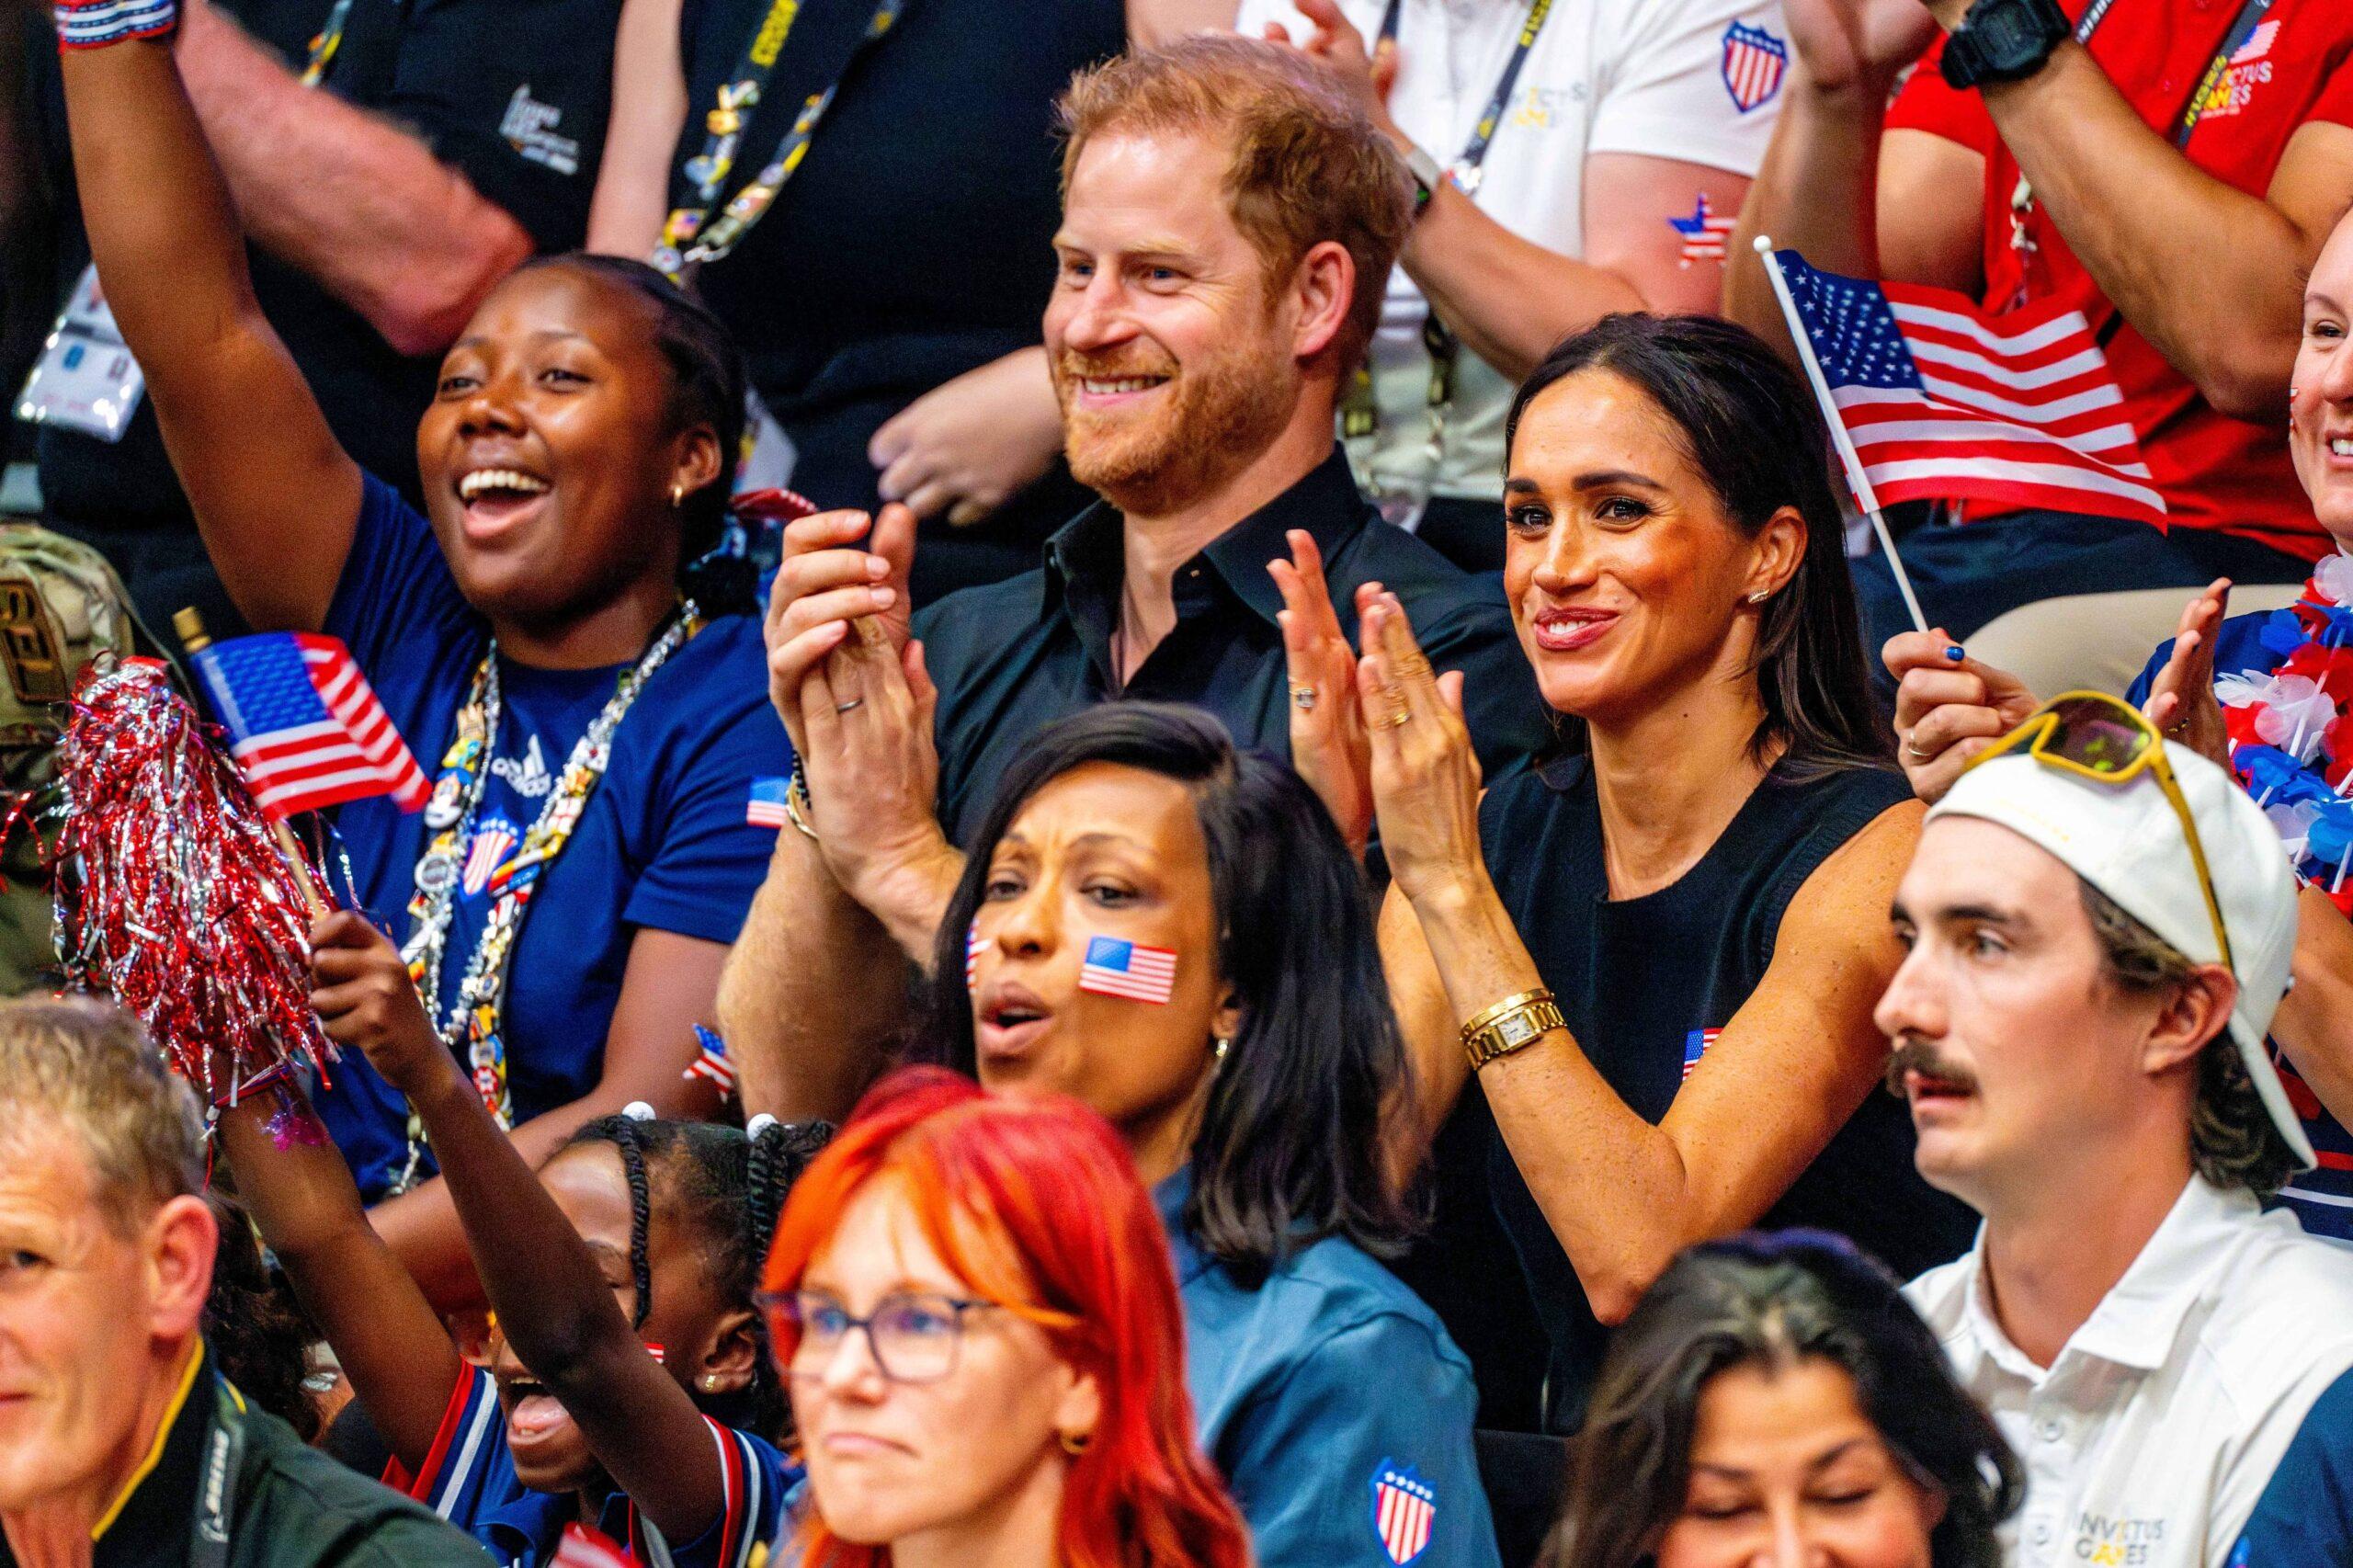 Prince Harry and Meghan Markle are set to visit Nigeria days after the Duke's Invictus event in the UK